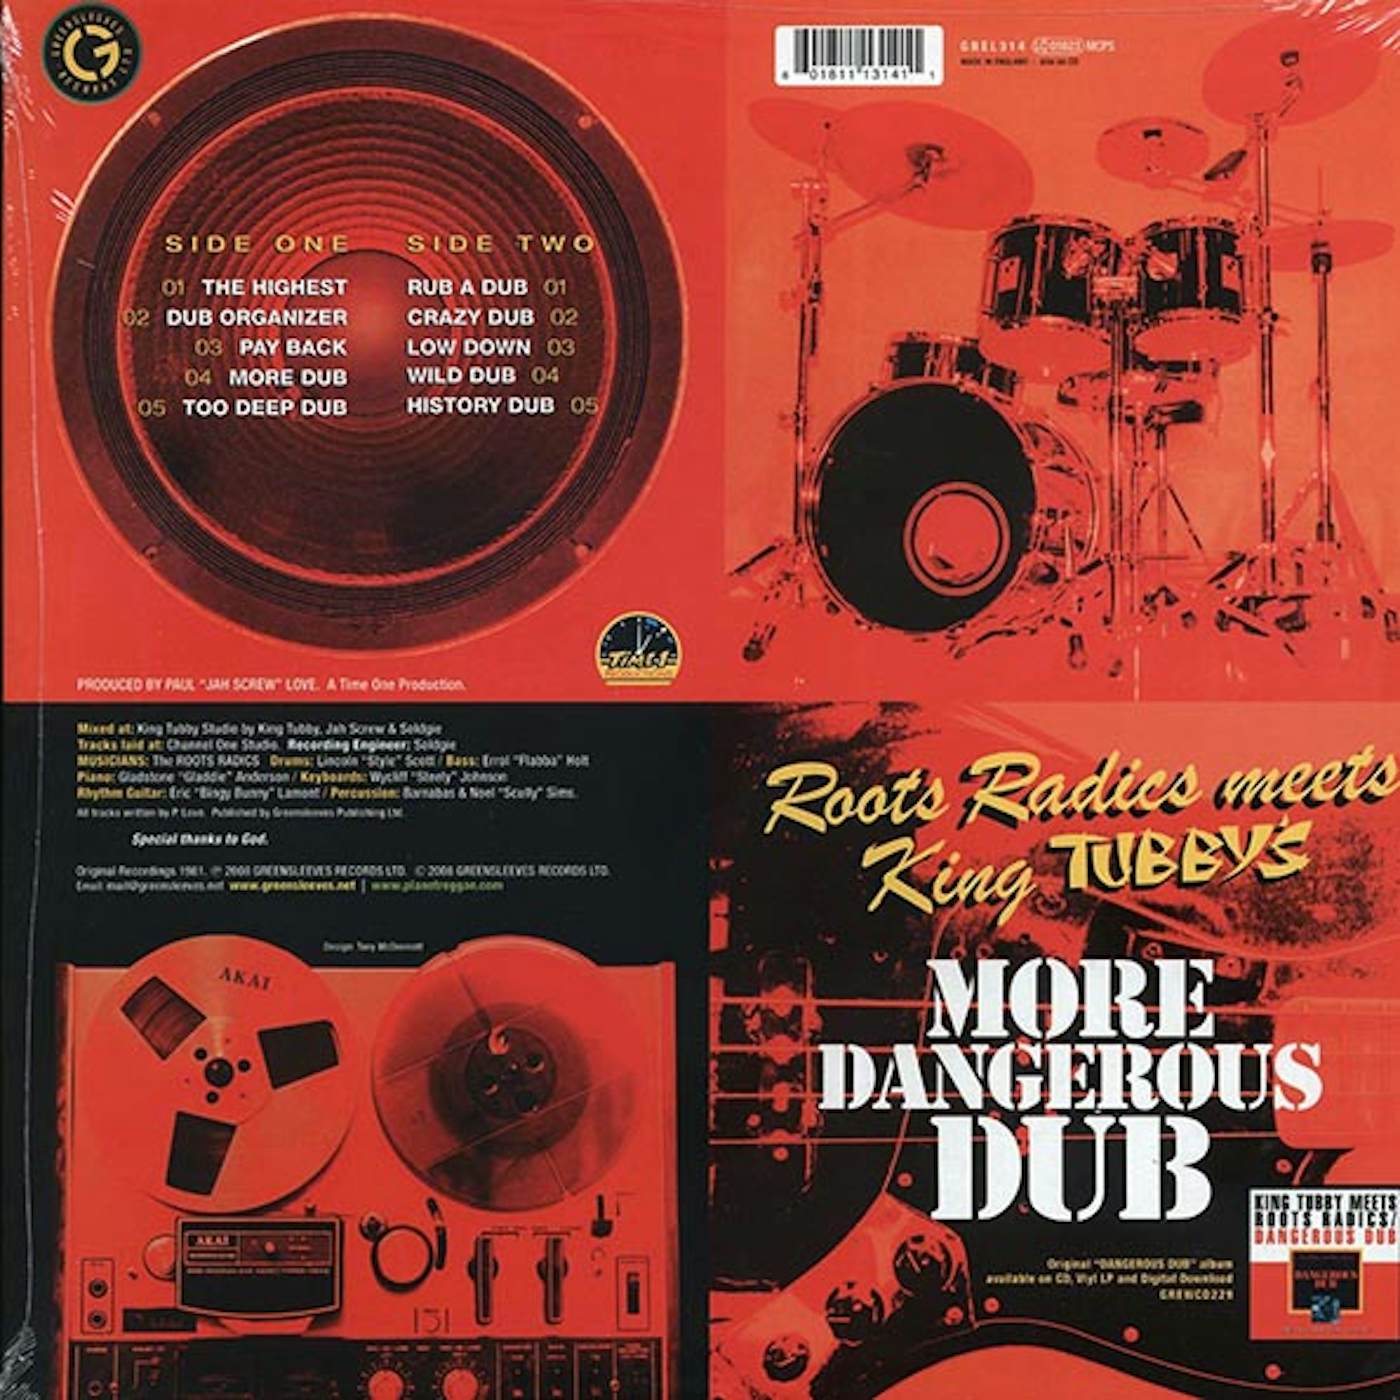 The Roots Radics, King Tubby  LP -  More Dangerous Dub: The Roots Radics Meet King Tubby (Vinyl)